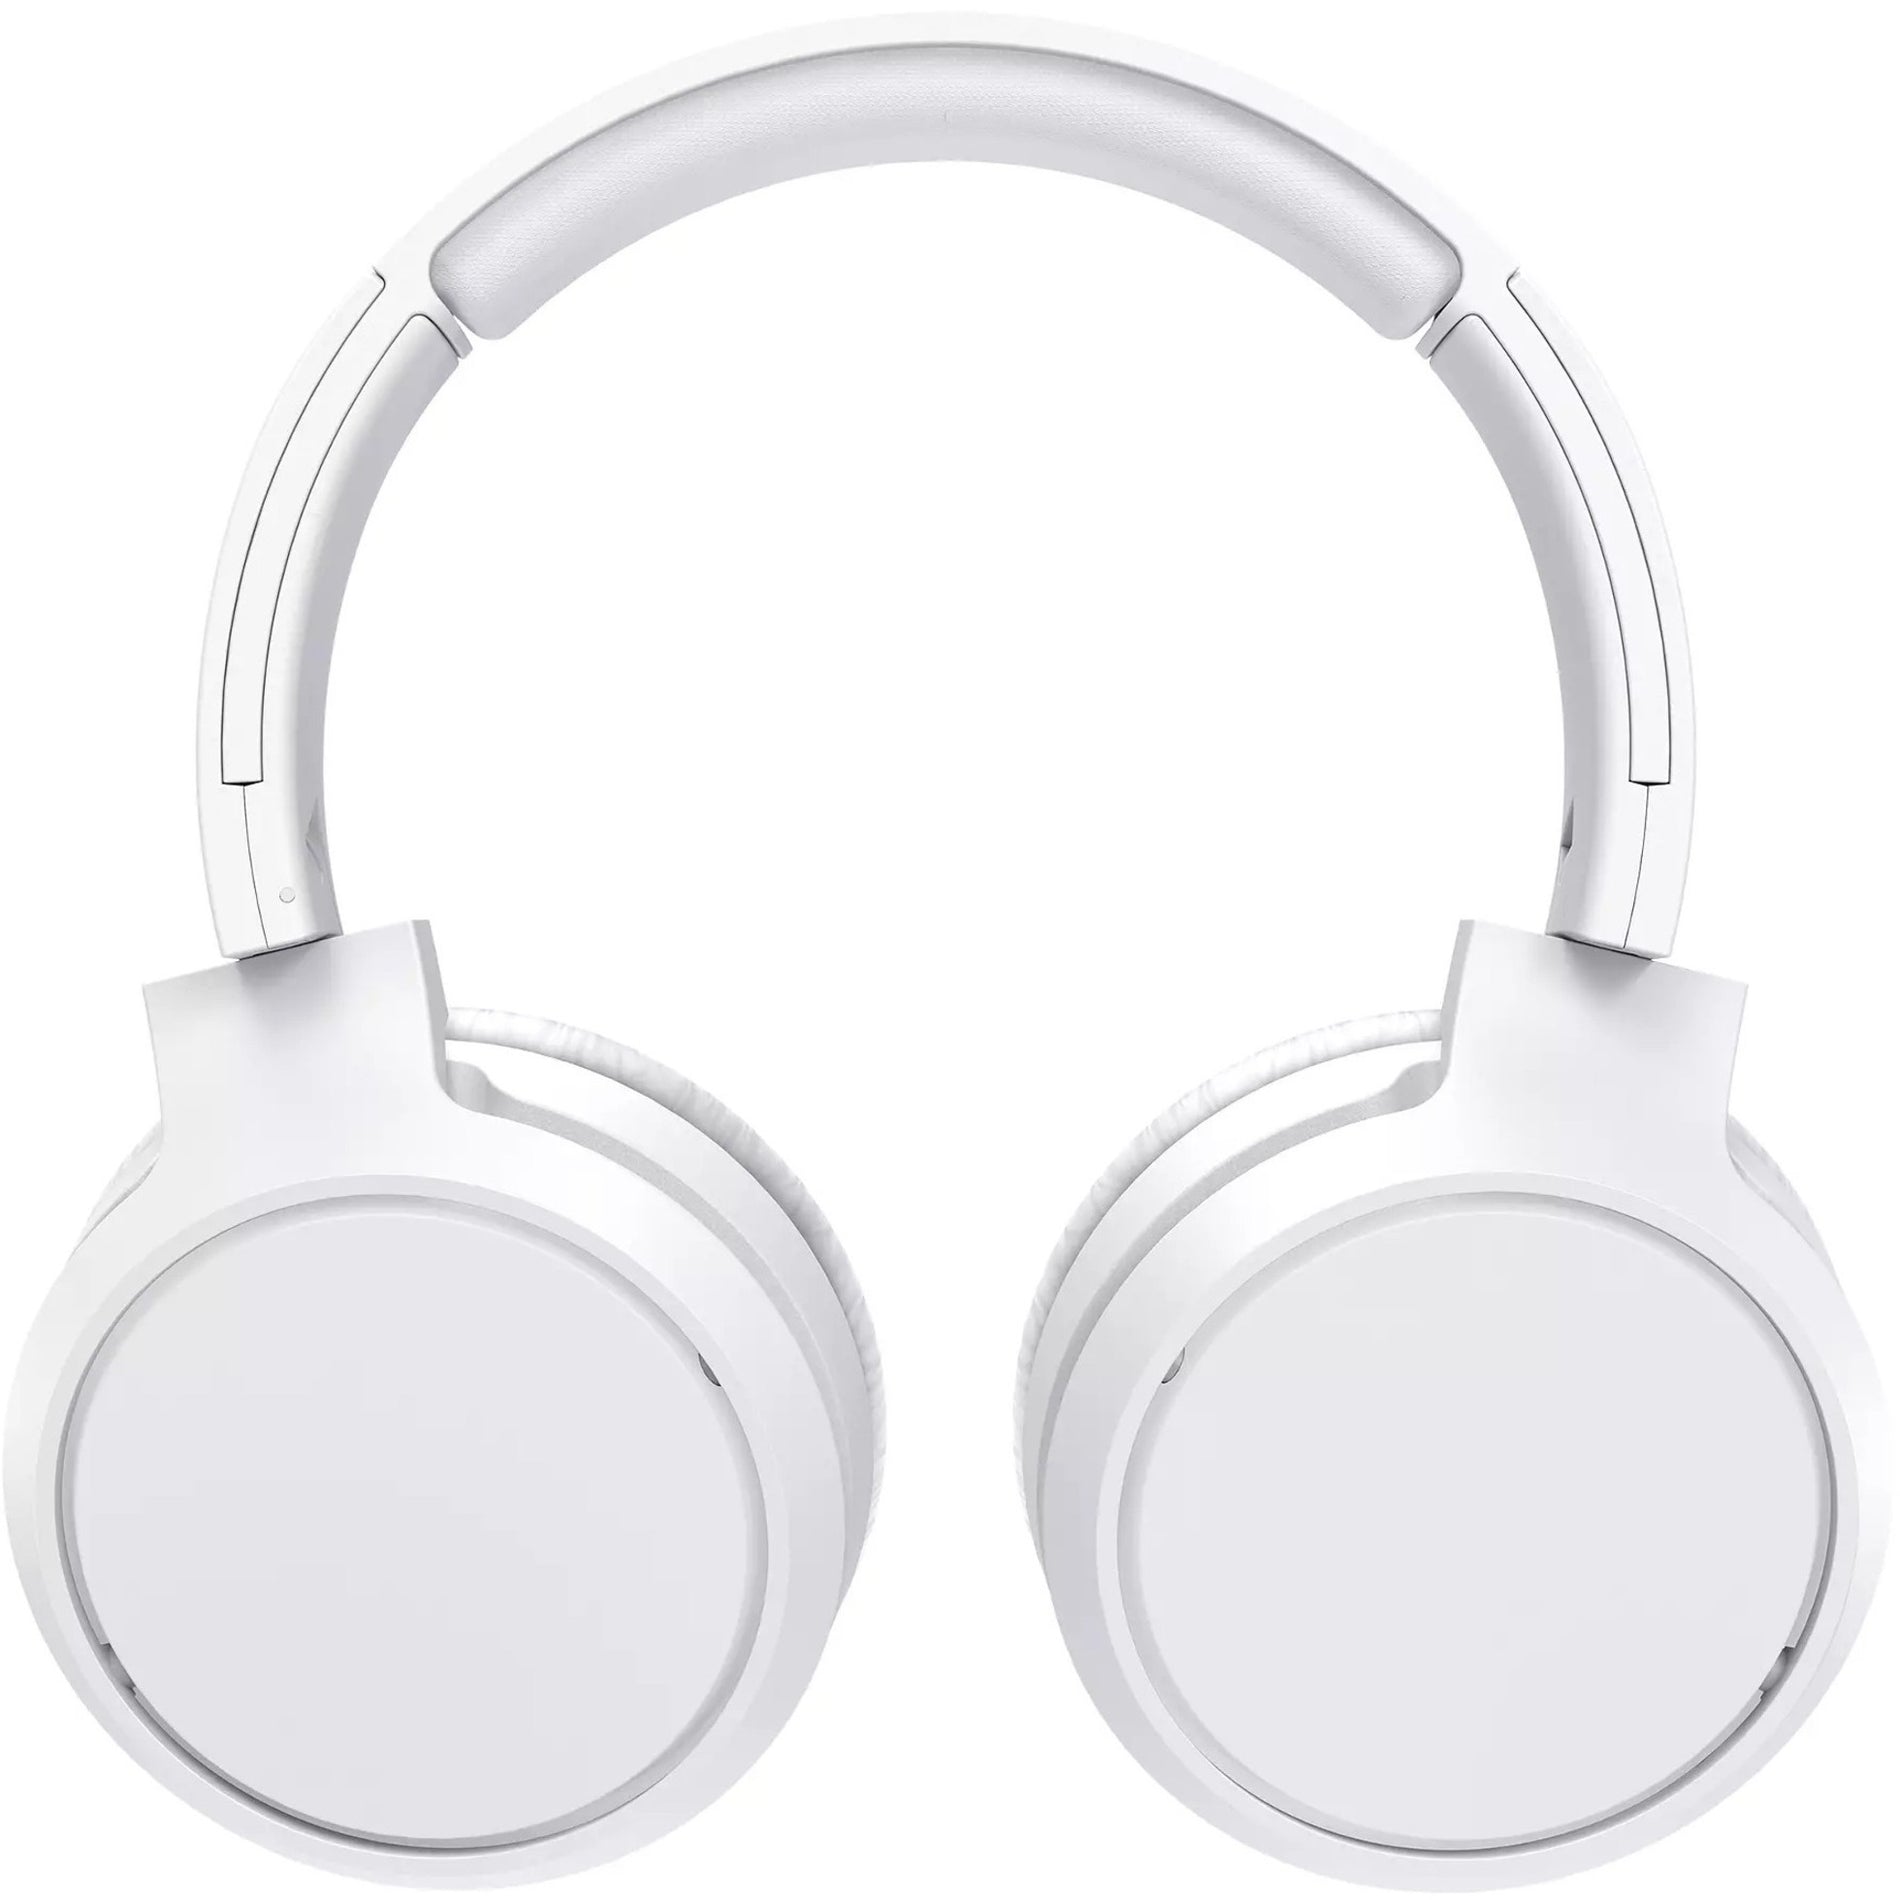 Philips TAH5205WT/00 Headset, Fold-Flat Lightweight Over-the-Ear Headphones with Integrated Microphone, White